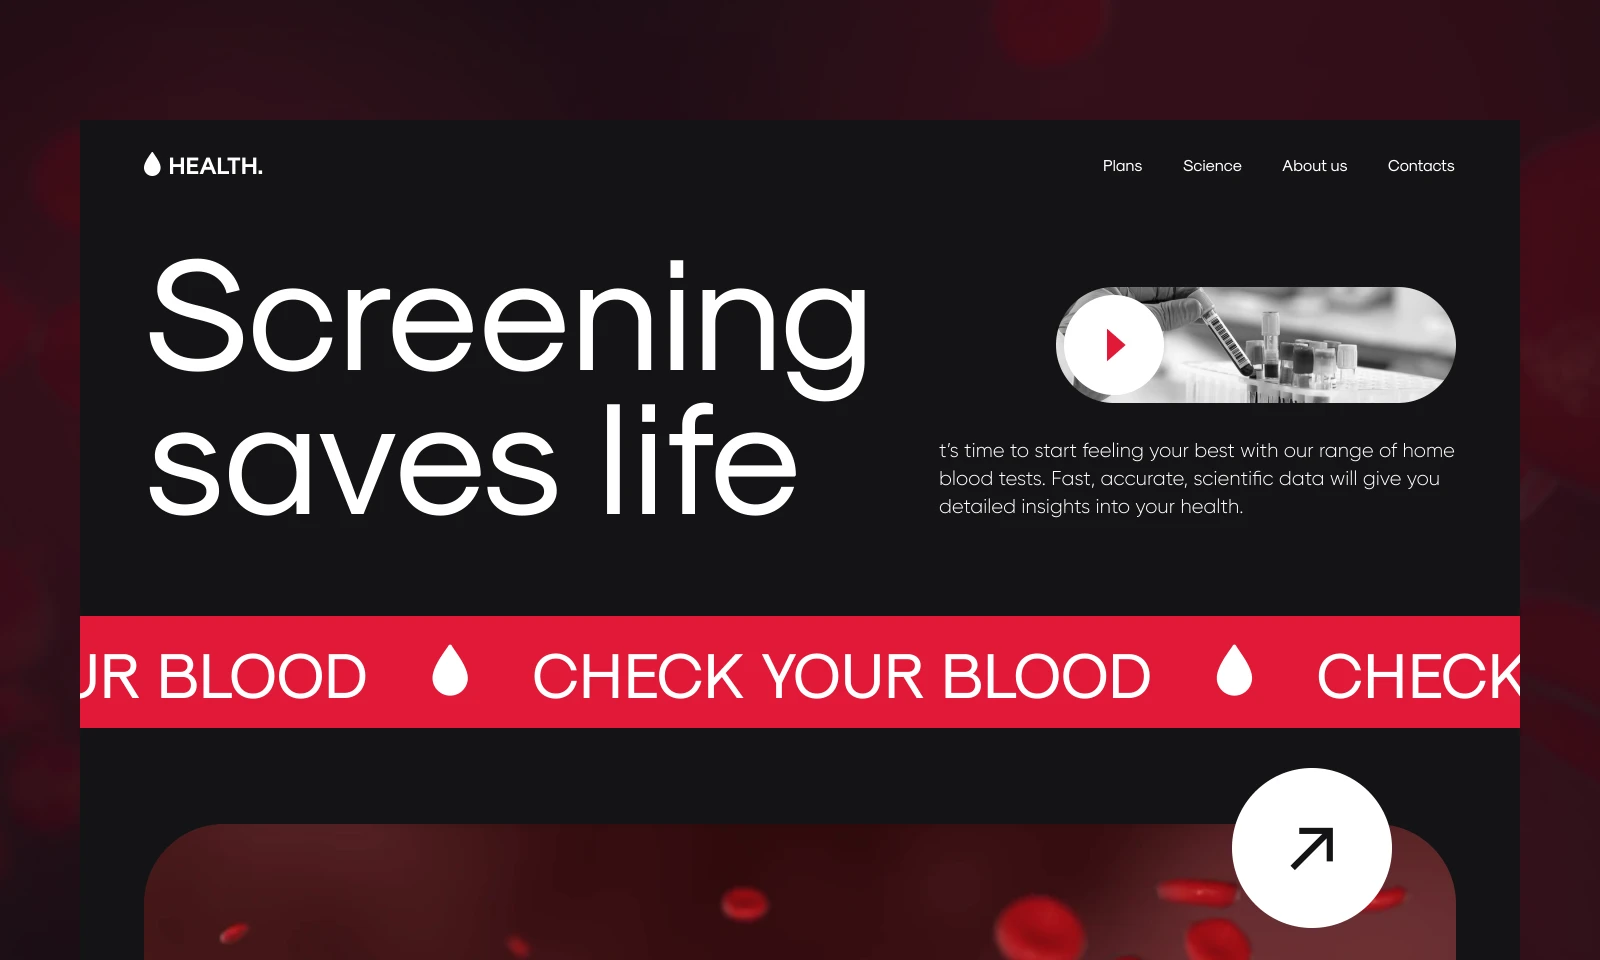 Blood Screening Company Website for Figma and Adobe XD